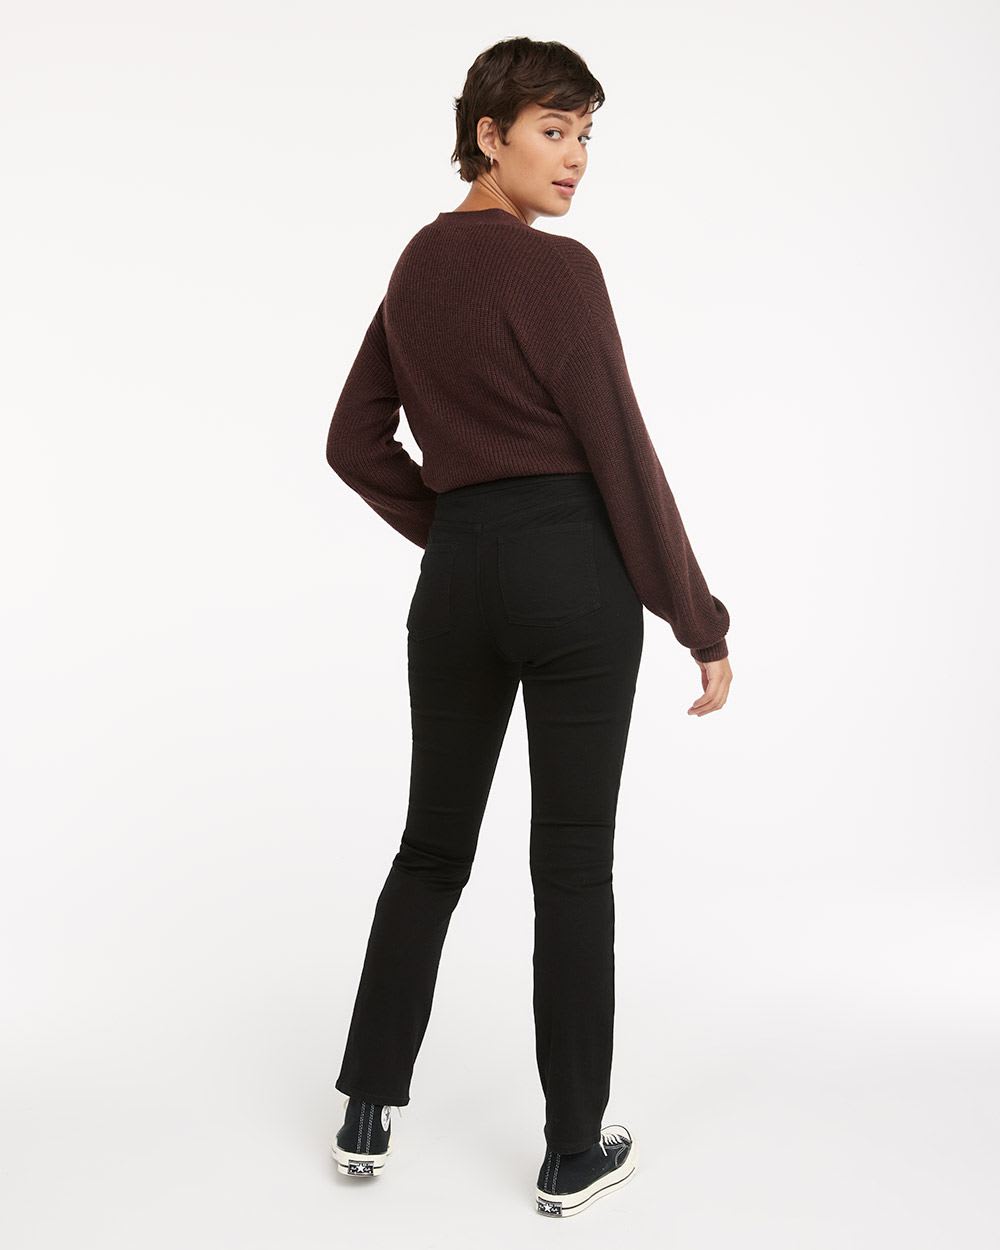 Mid-Rise Black Pant with Straight Leg, The Original Comfort